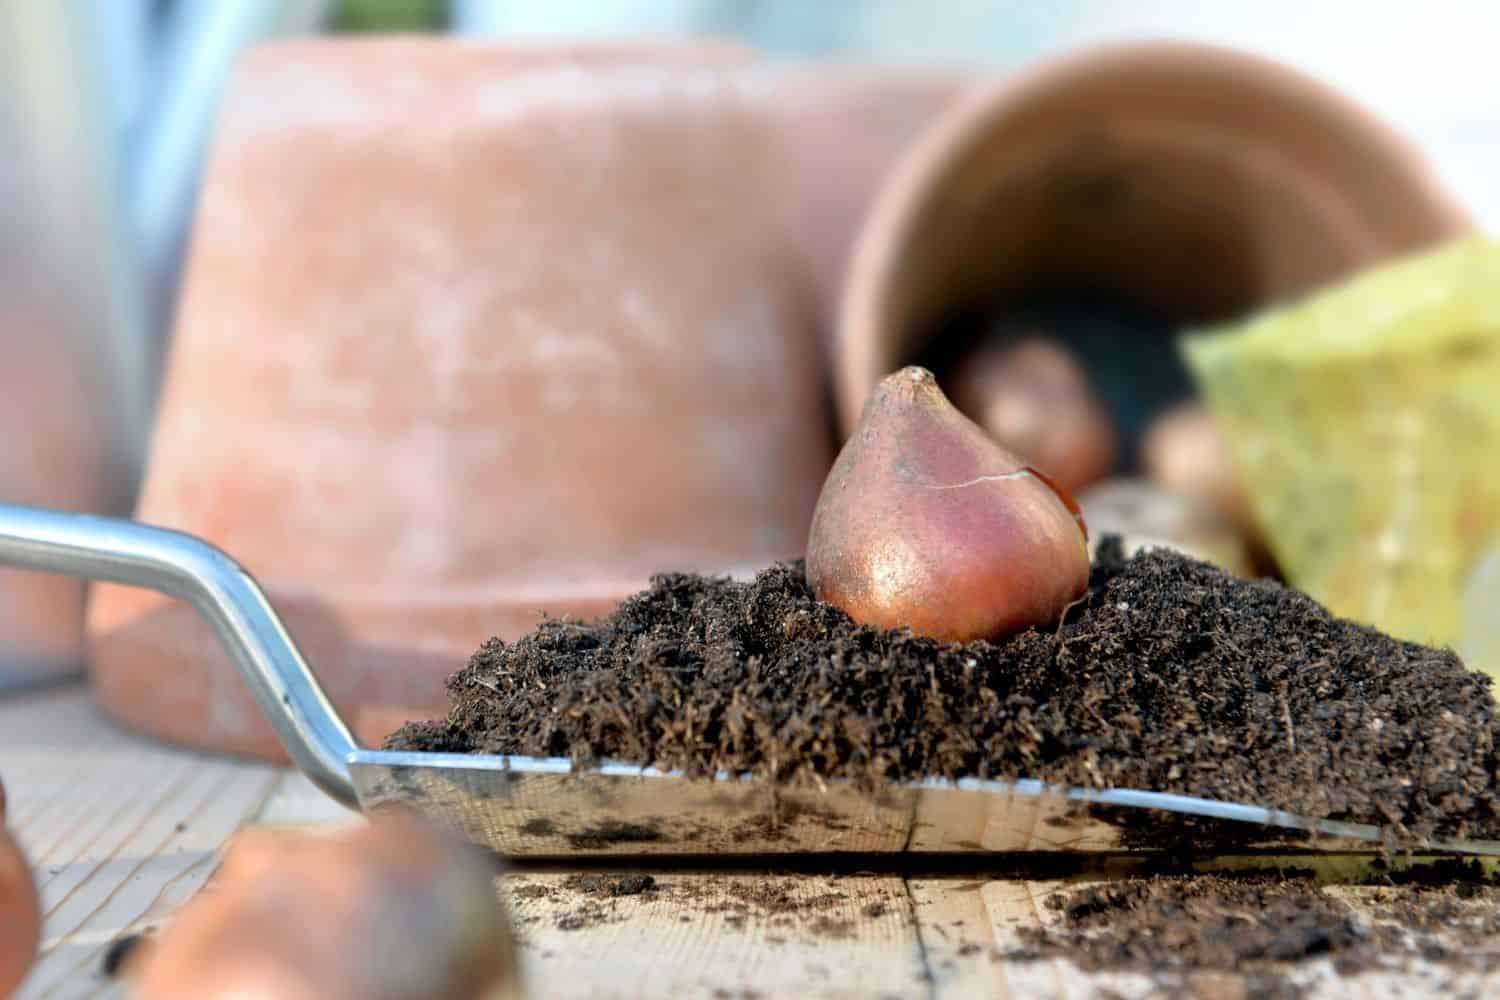 How To Plant Tulip Bulbs In Pots